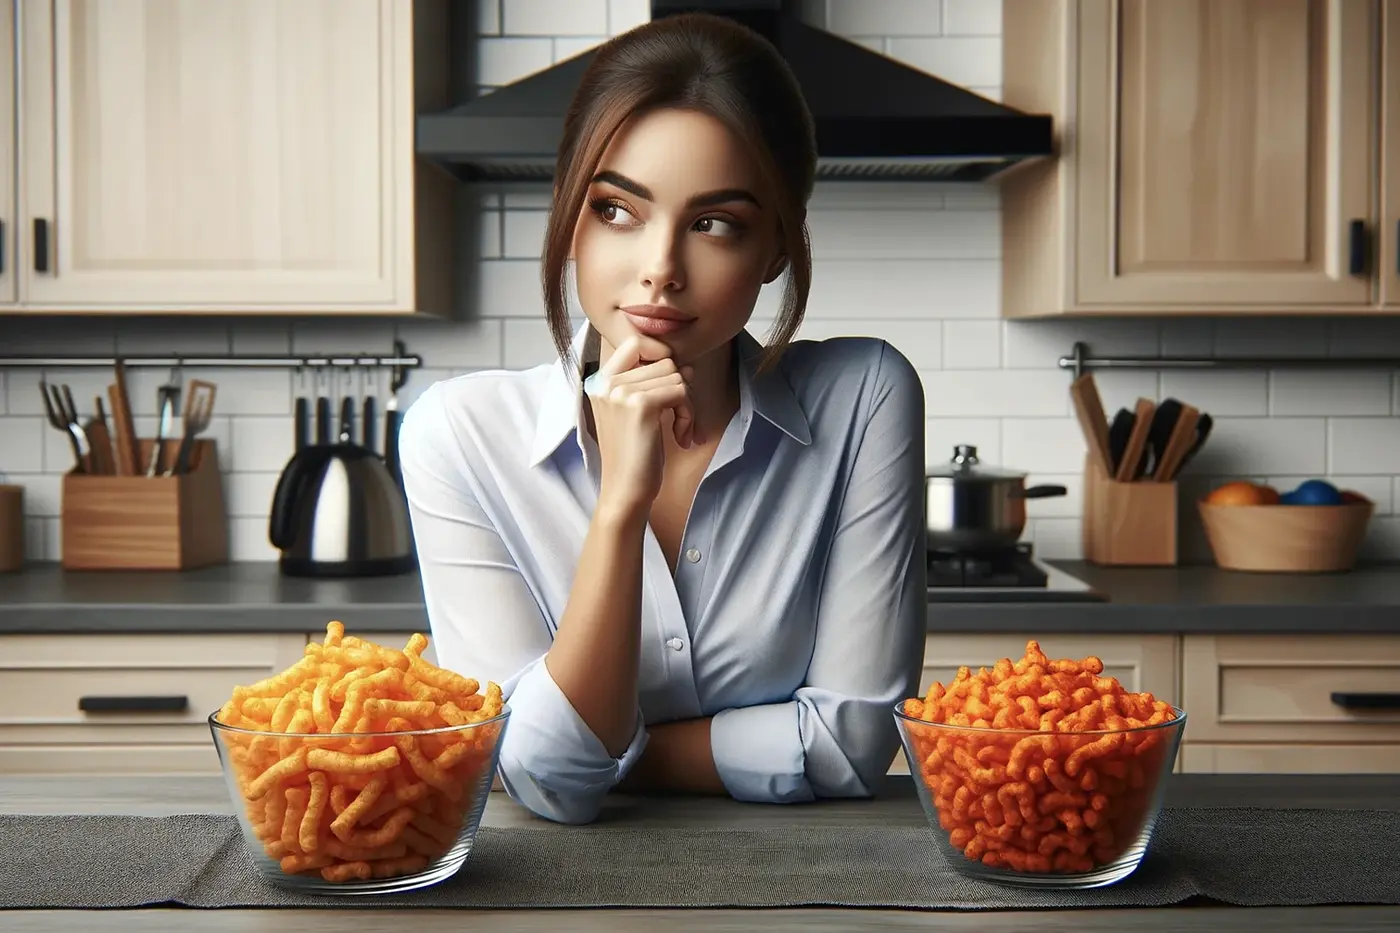 A woman contemplating which bowl of Cheetos to start eating.